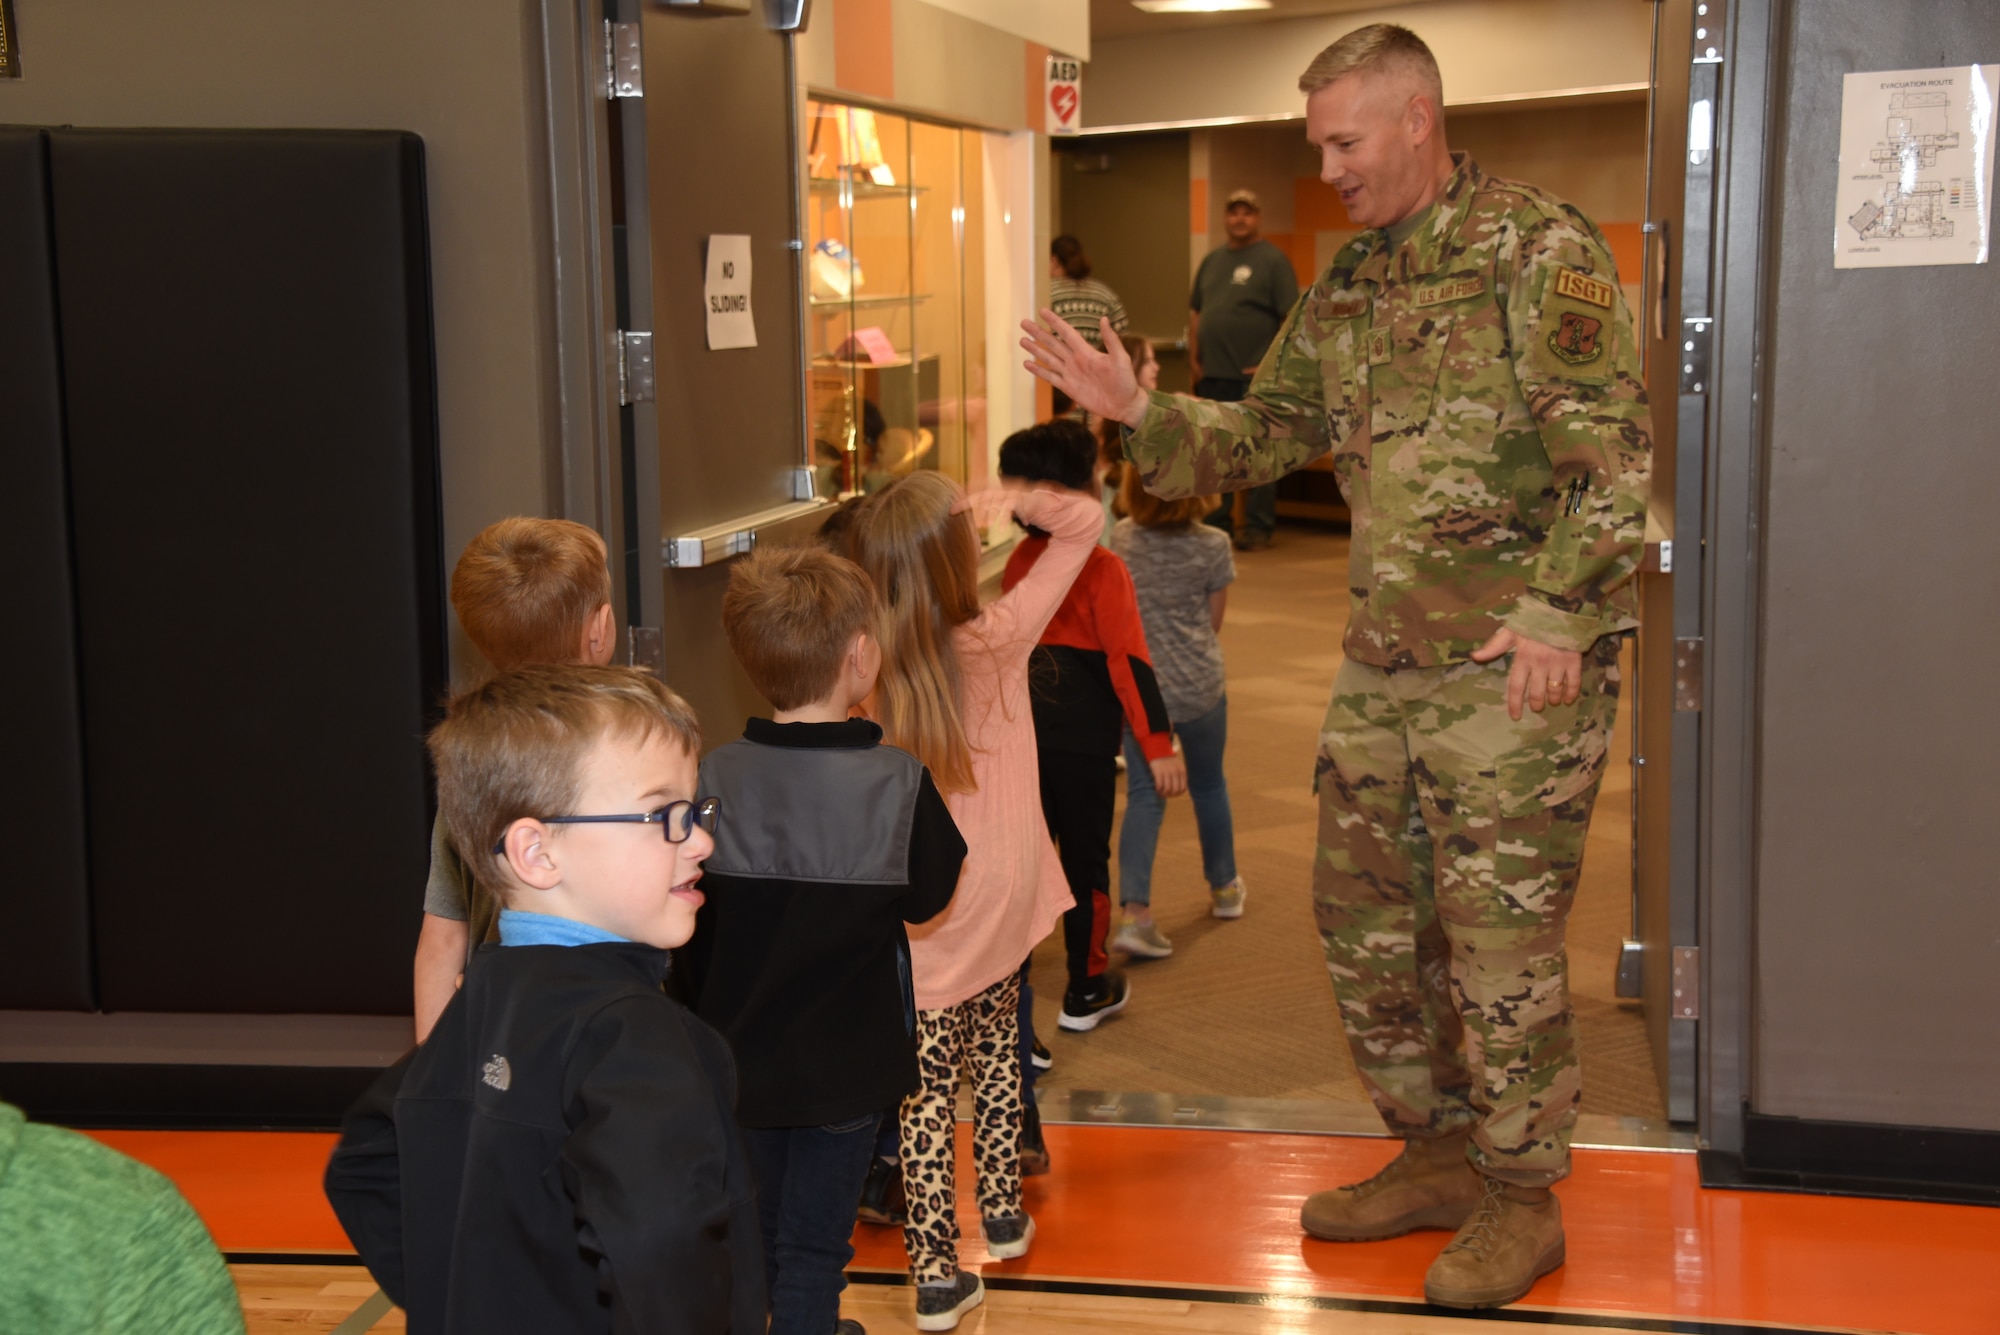 1st Sgt. Drew Wagner high fives students at a welcome home event in his honor at the Fort Calhoun Elementary School in Fort Calhoun, Neb., April 21, 2022, after his six-month deployment to Southwest Asia. Wagner is the school principal and has served in the Iowa Air National Guard for 20 years.